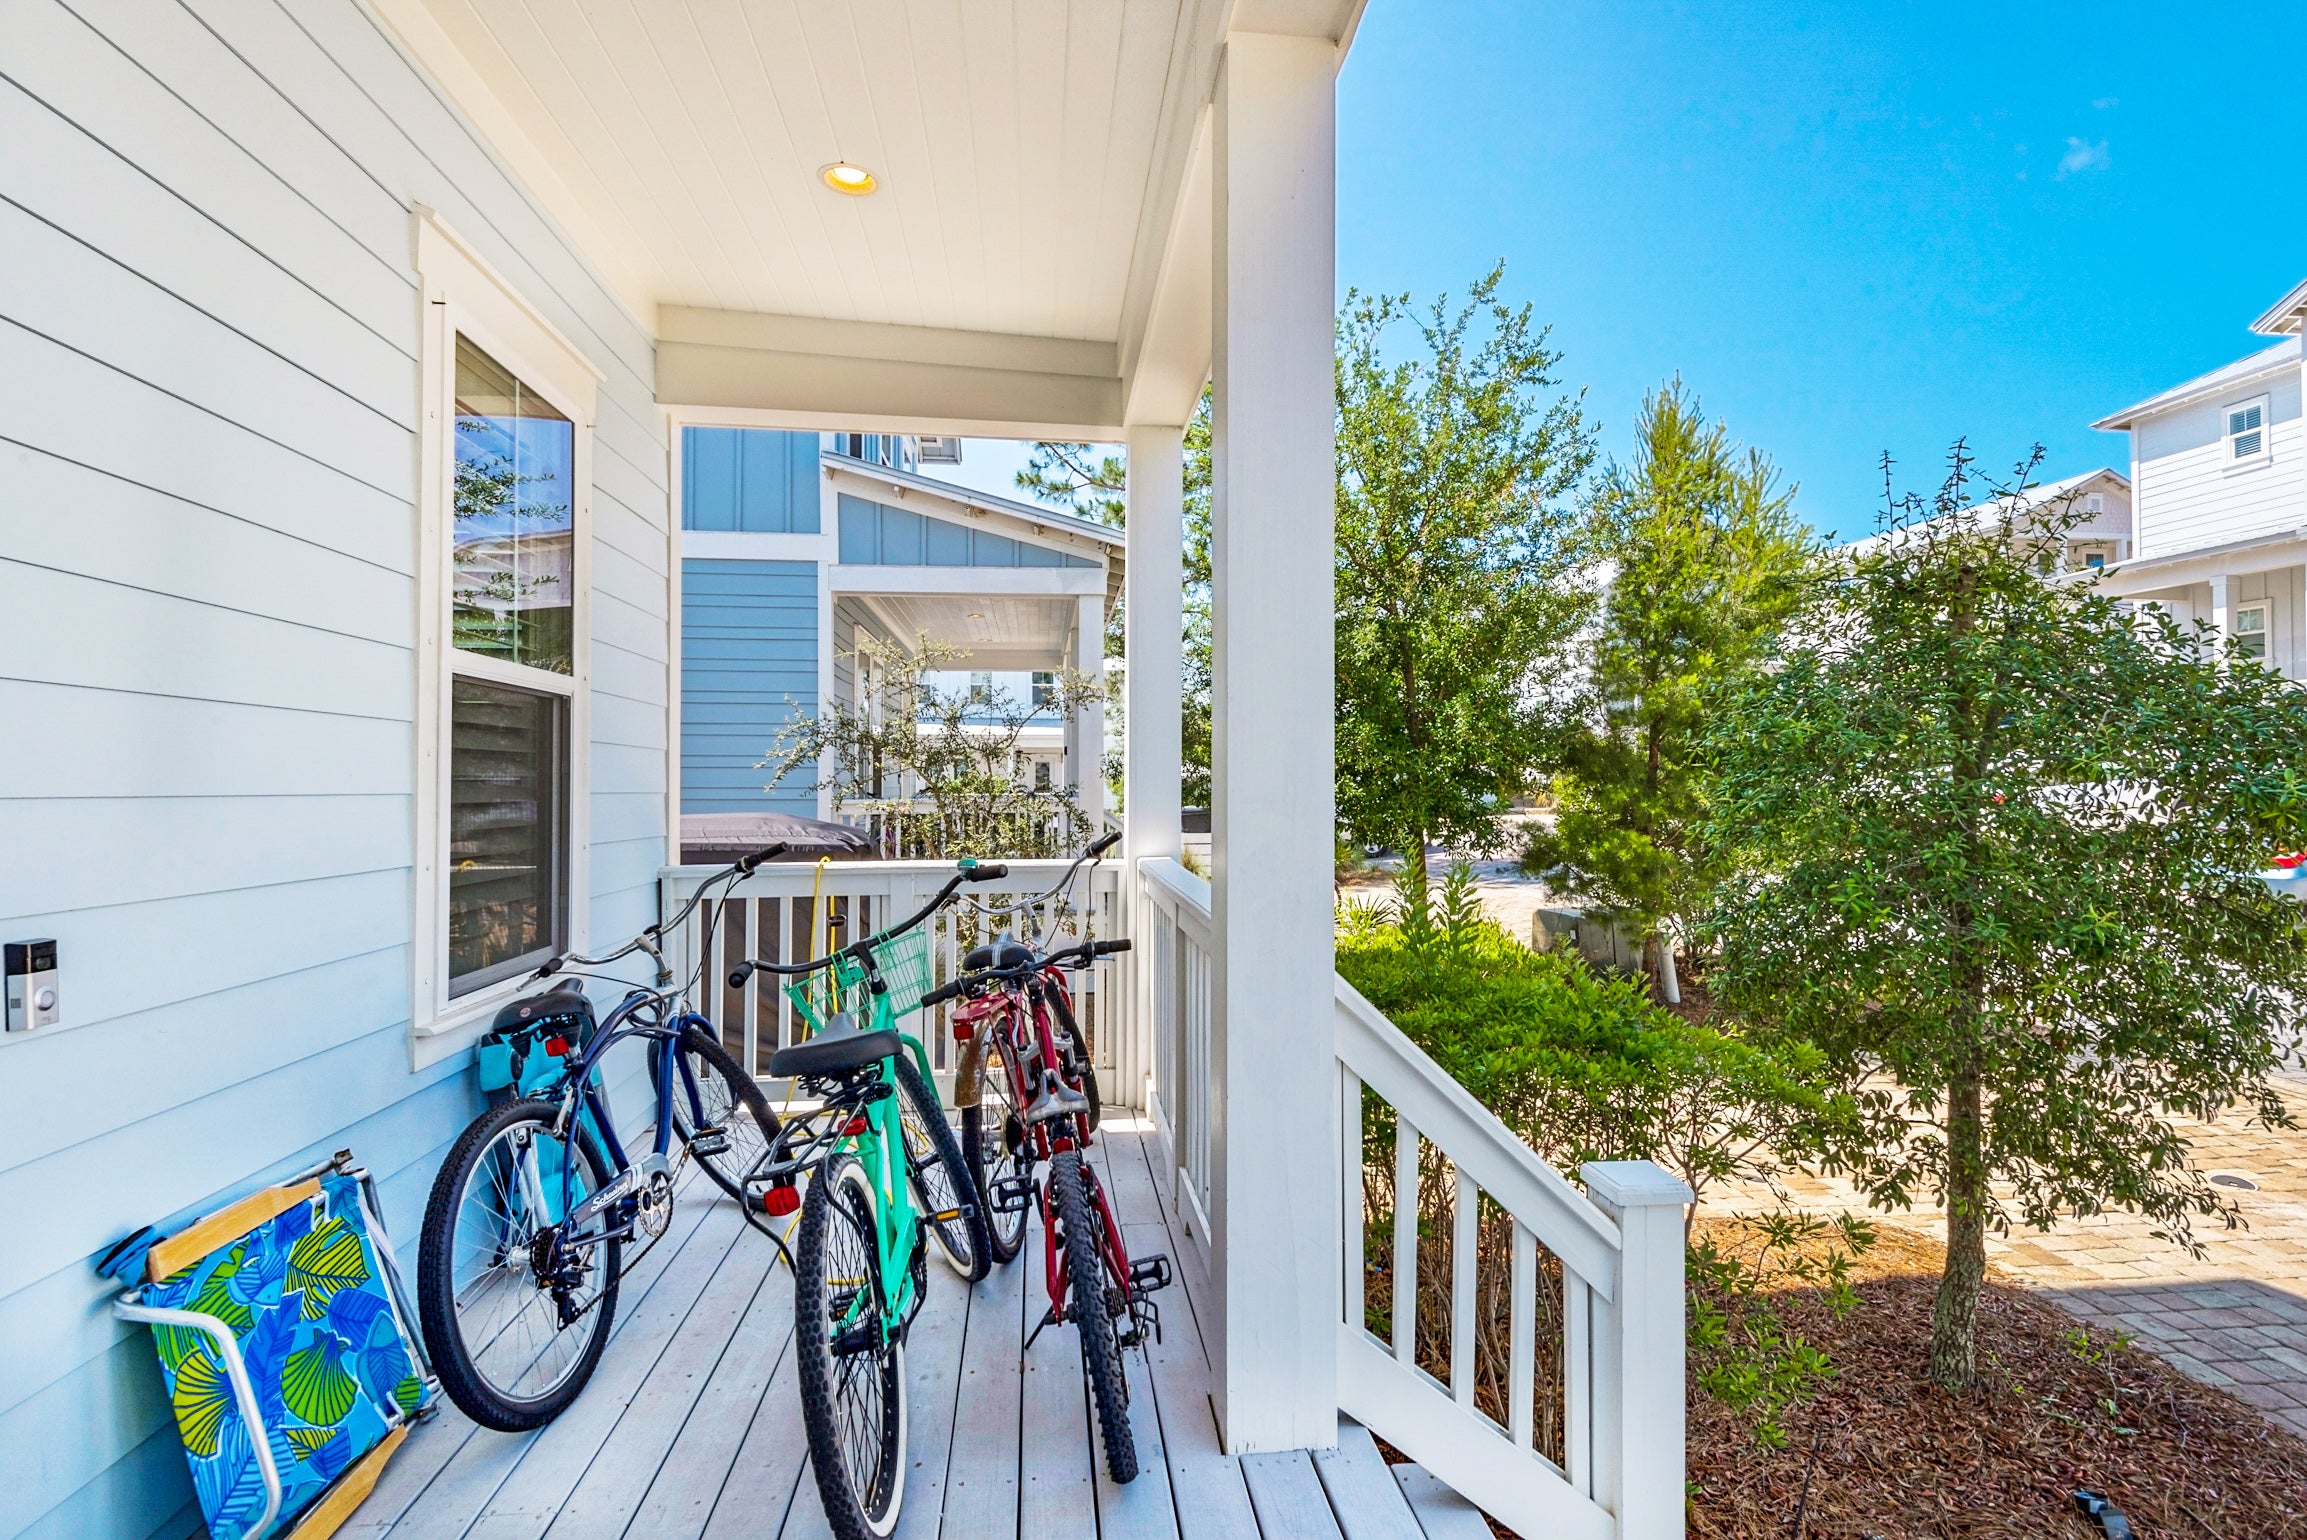 Bikes on the porch